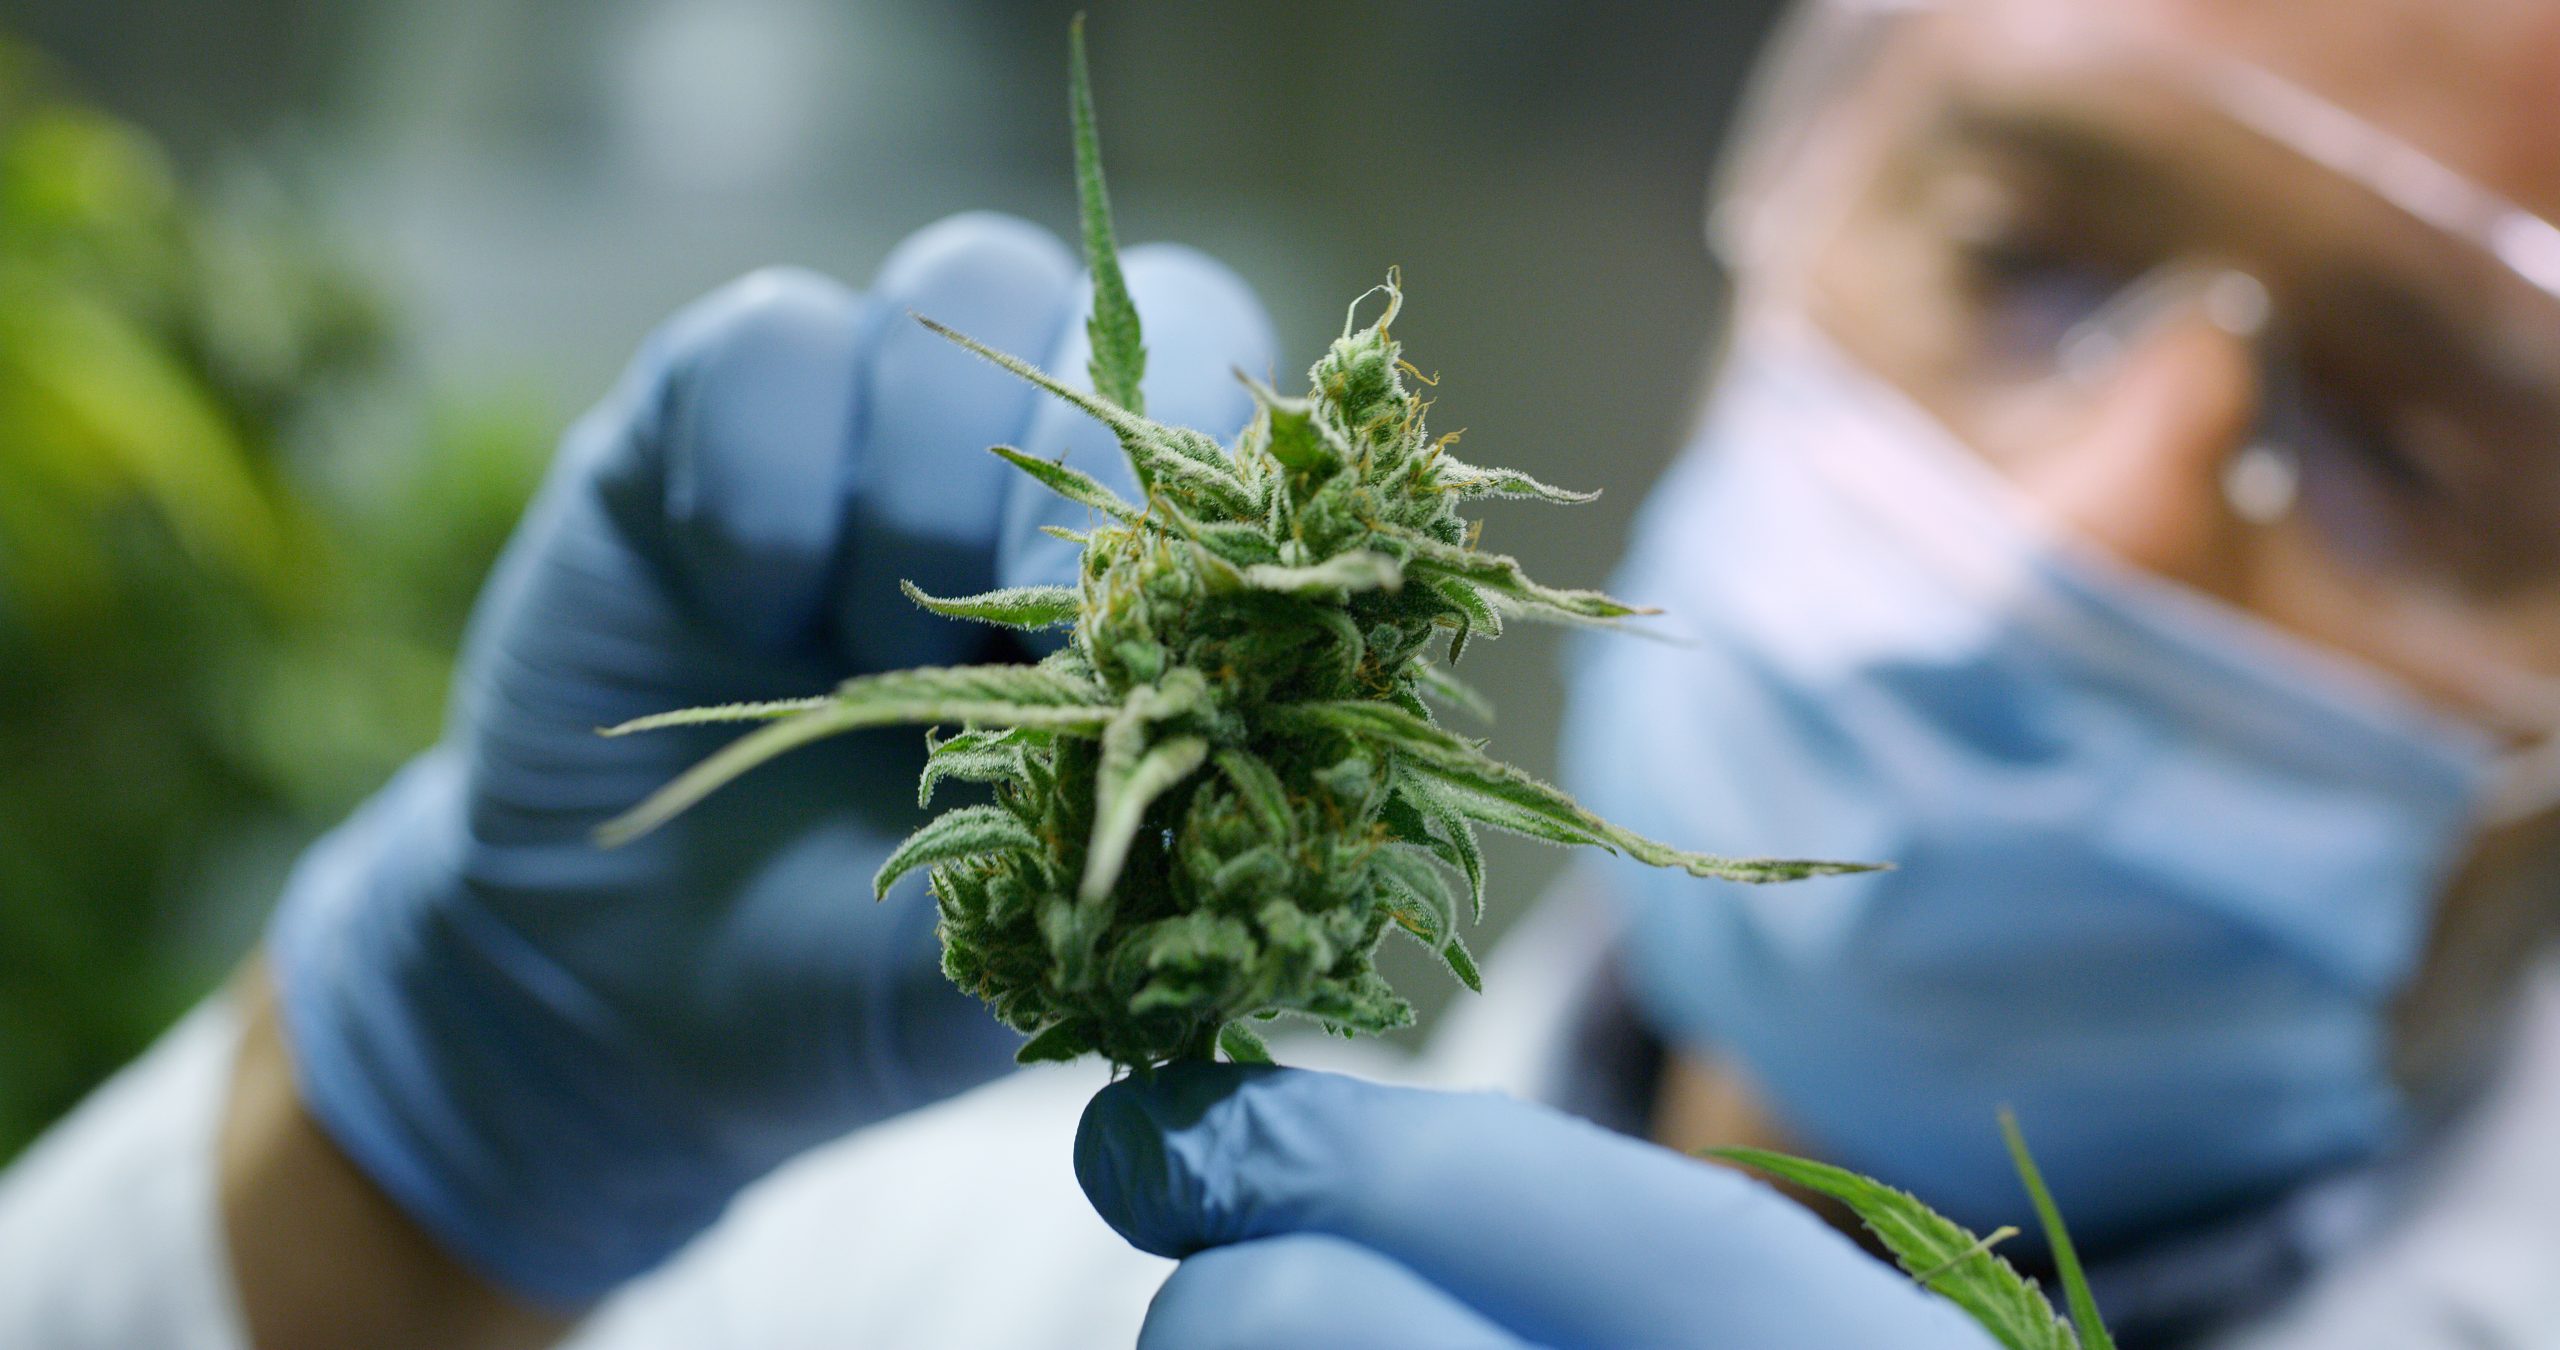 West Virginia To Revisit Medical Cannabis Lab Applications